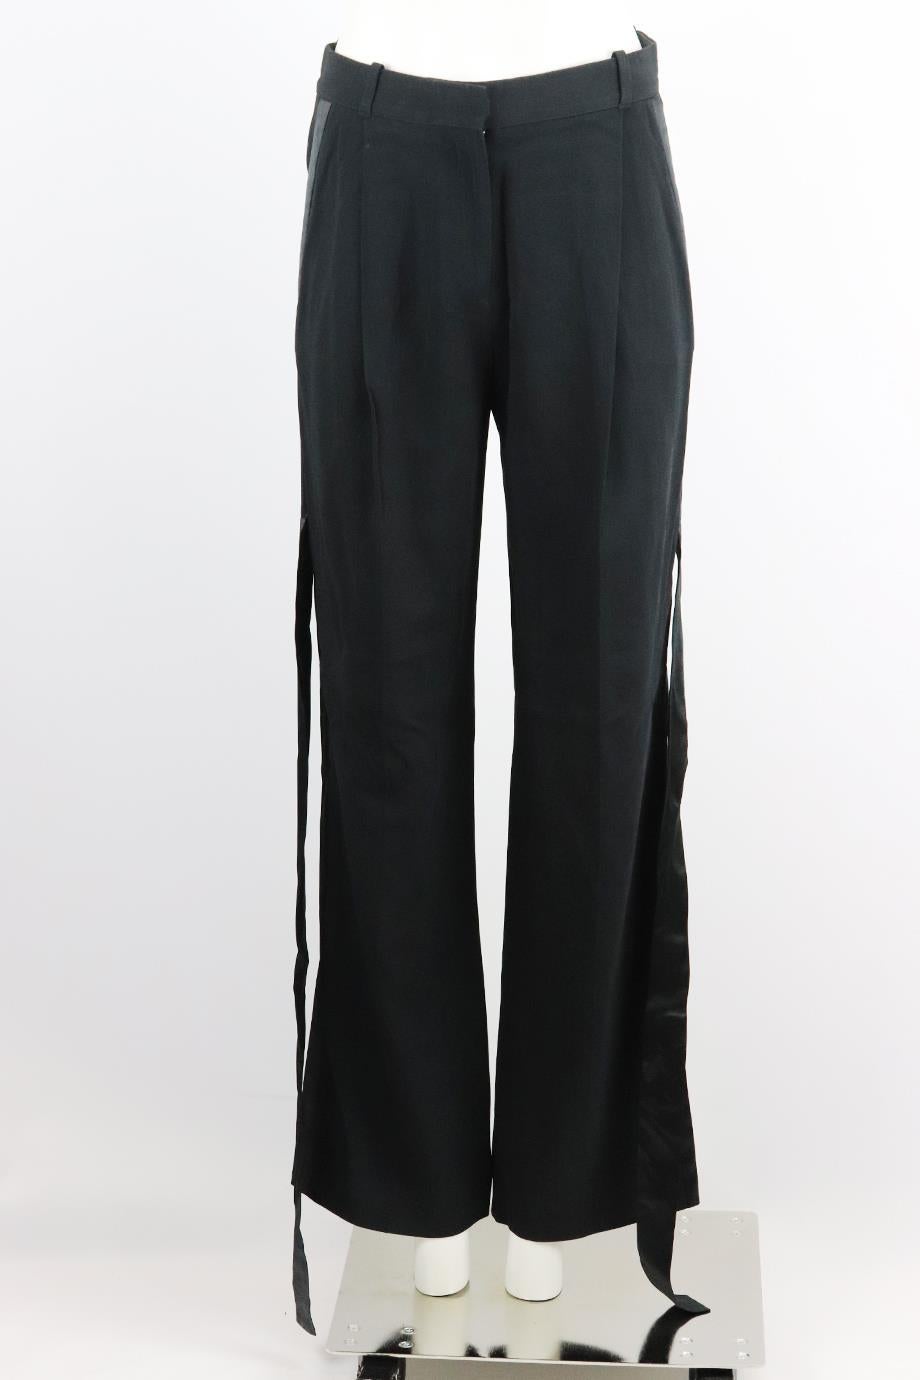 Givenchy satin trimmed woven wide leg pants. Black. Hook and zip fastening at front. 95% Viscose, 5% elastane; fabric2: 100% silk; fabric3: 71% acetate, 29% silk; waistband: 64% cotton, 19% polyester, 13% moda, 4% polyamide. Size FR 34 (UK 6, US 2,